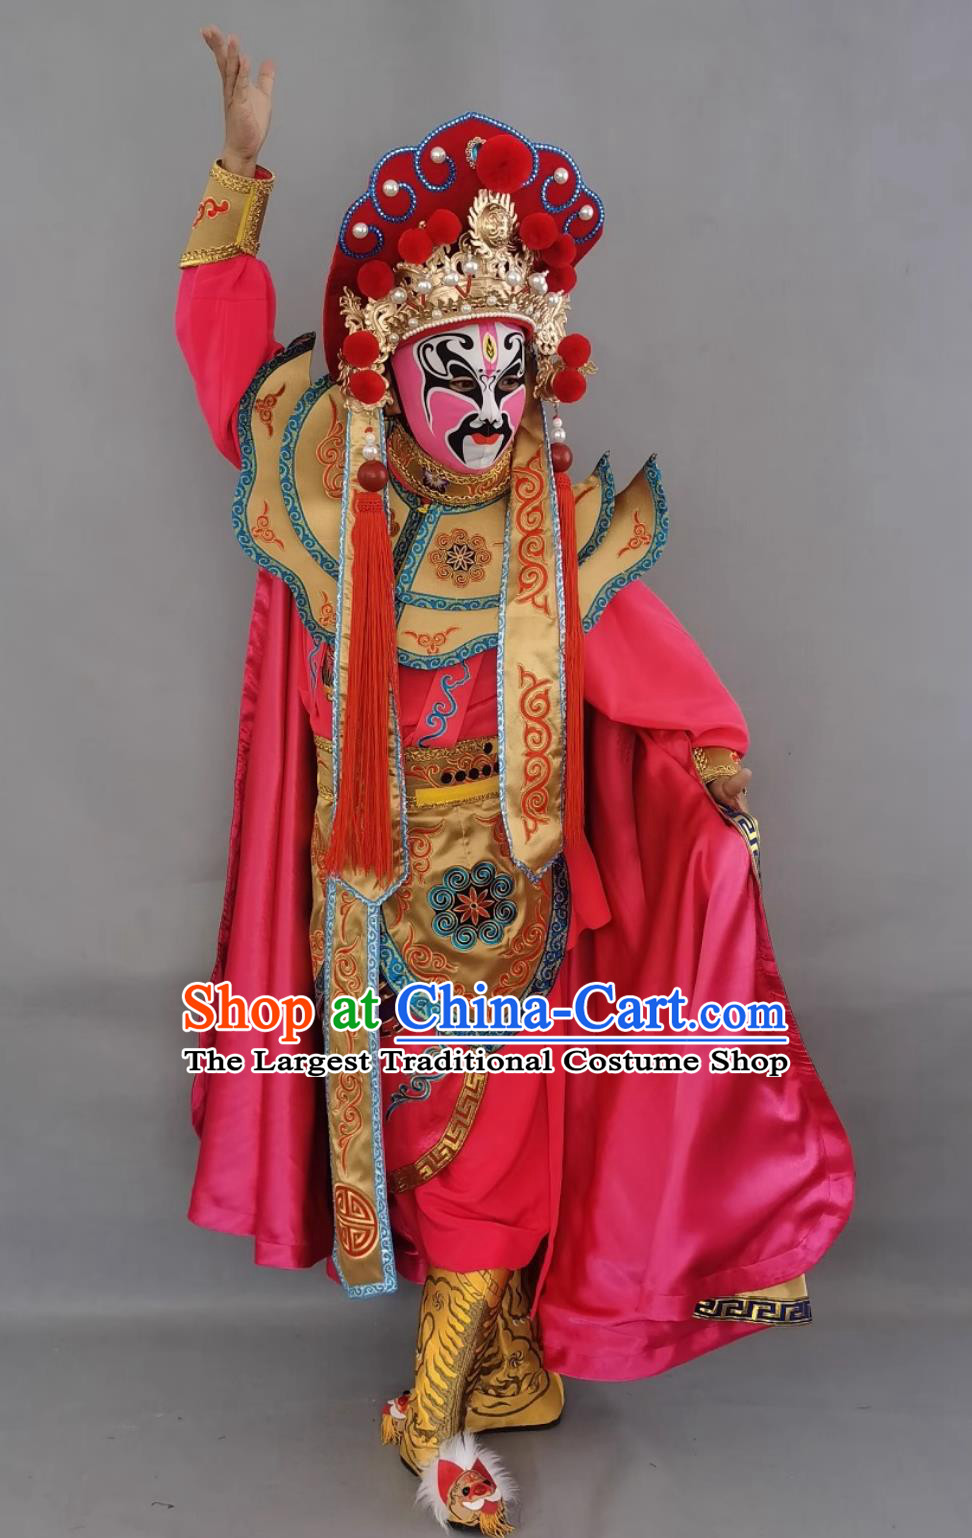 China Bian Lian Costume Sichuan Opera Face Changing Clothing Stage Magic Performance Golden and Pink Outfit